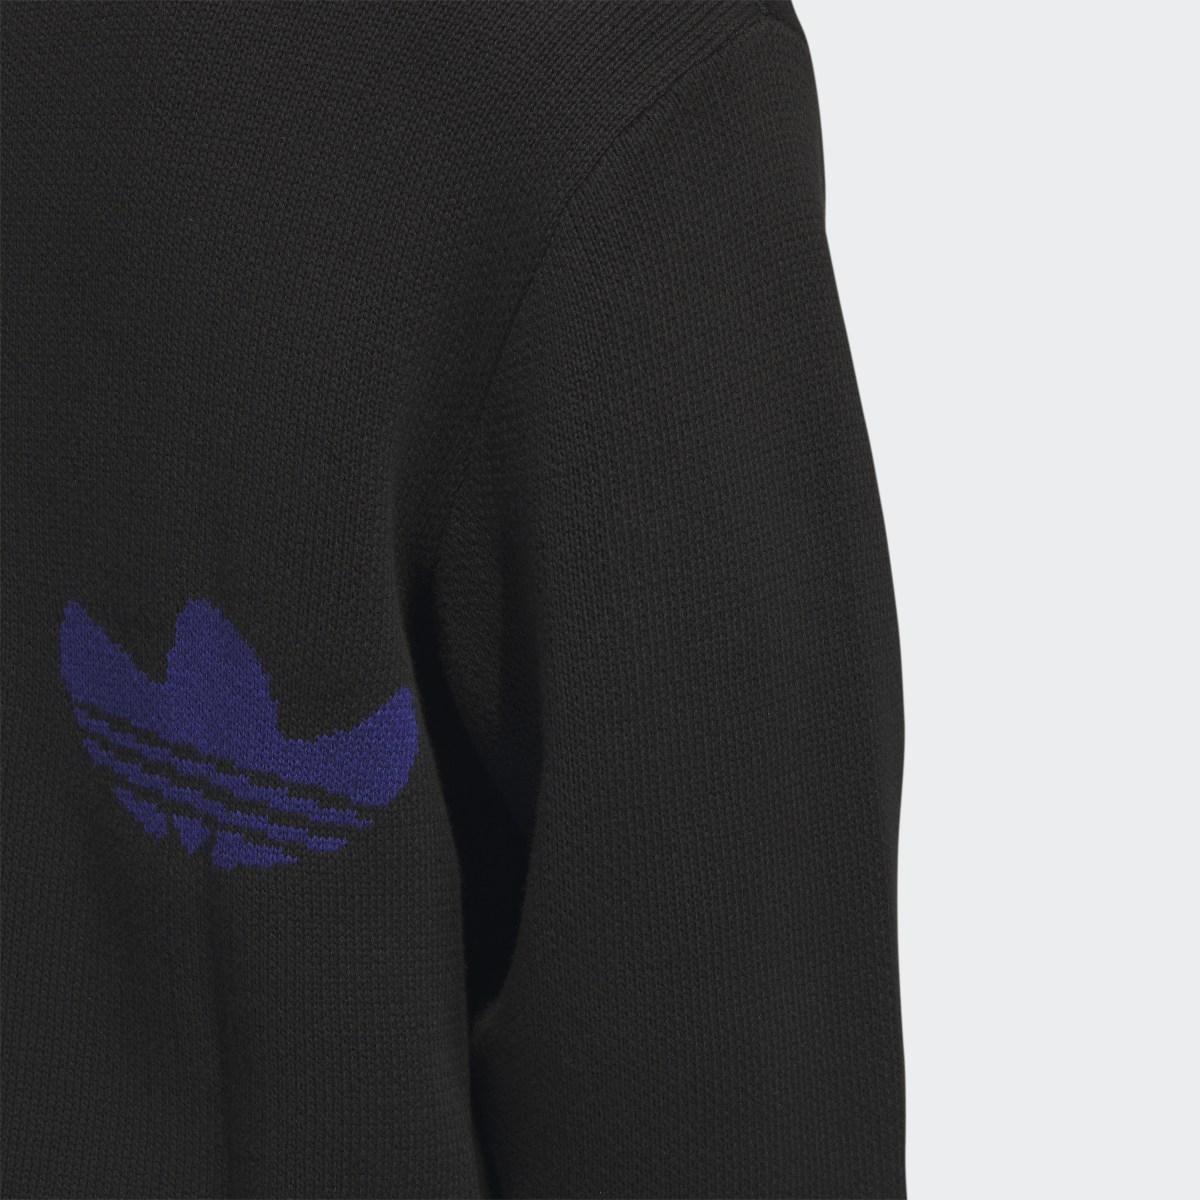 Adidas Shmoofoil Knit Sweater (Gender Neutral). 9